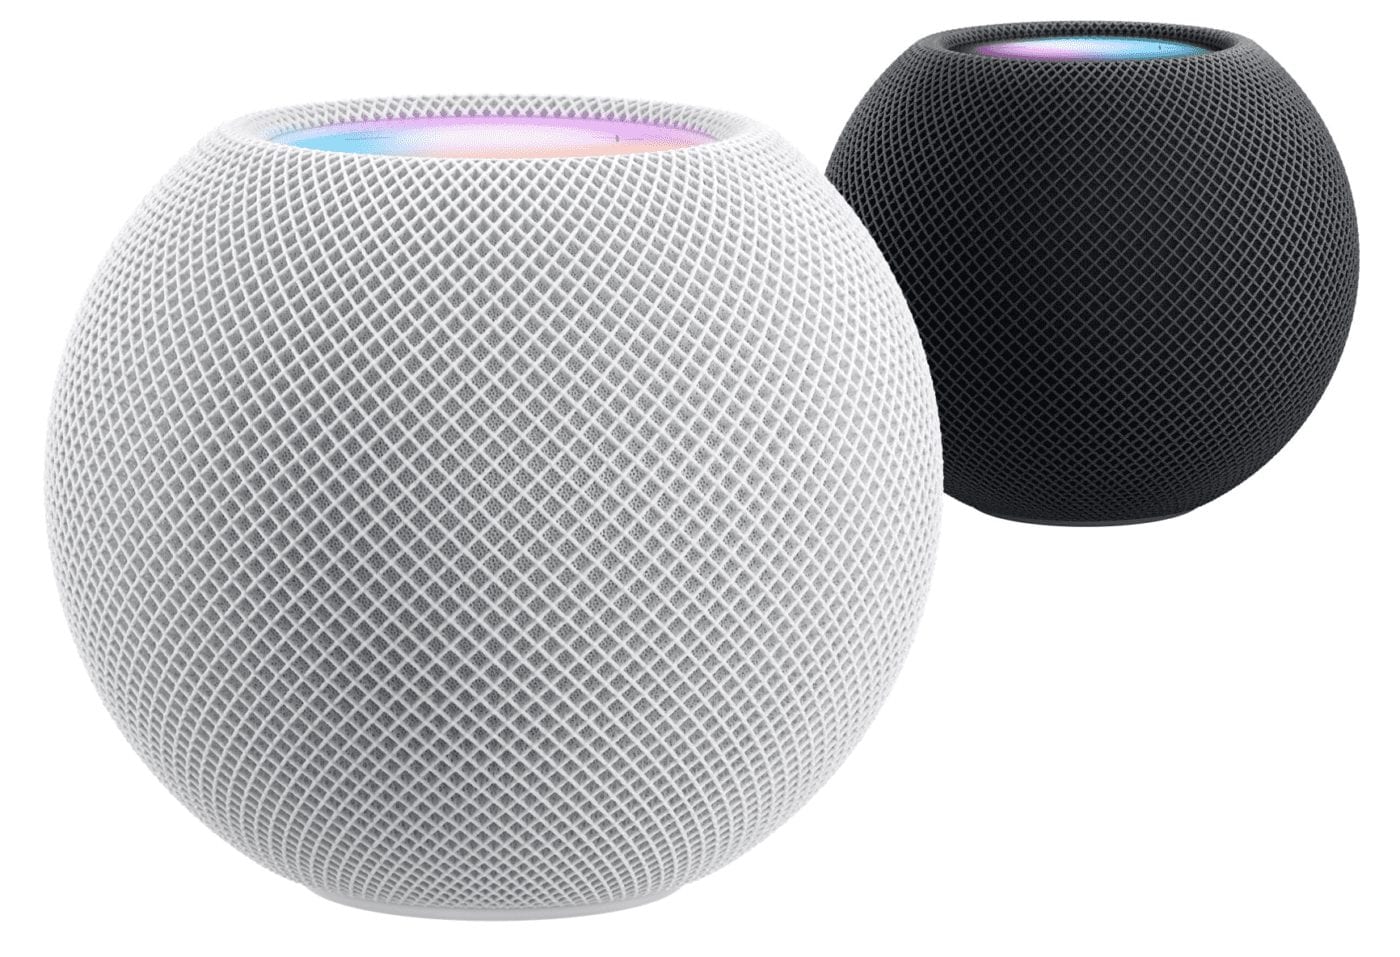 Apple's new HomePod mini packs the features of the original HomePod into a smaller and more affordable package